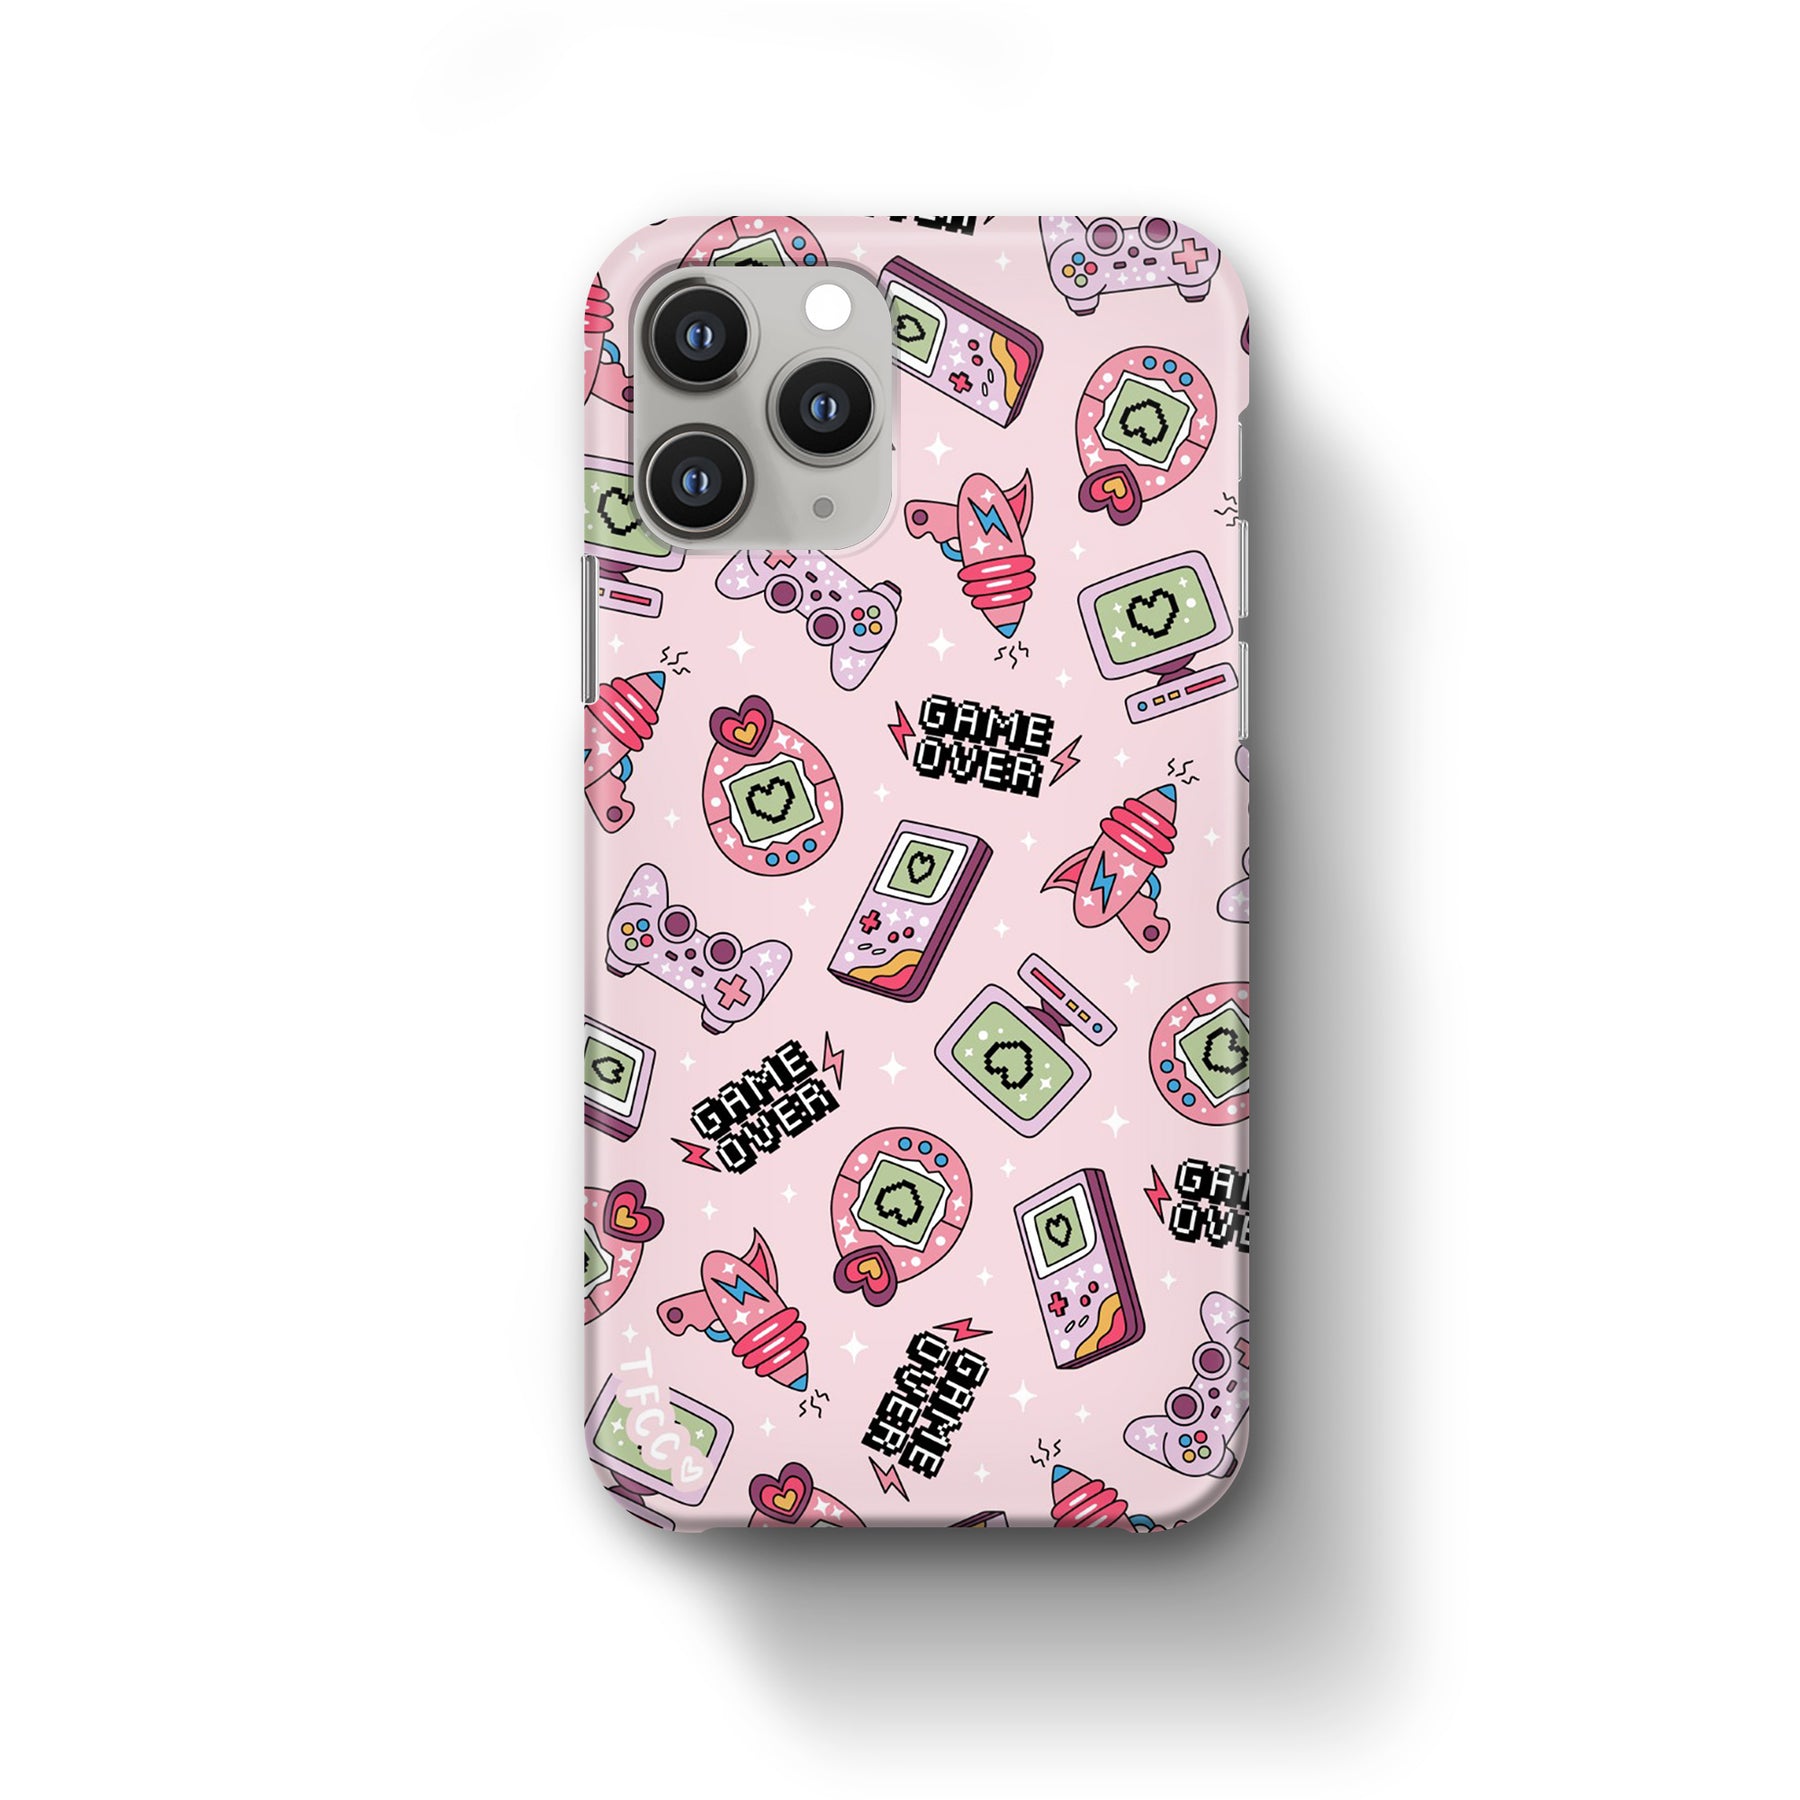 GAMER CASE - thefonecasecompany